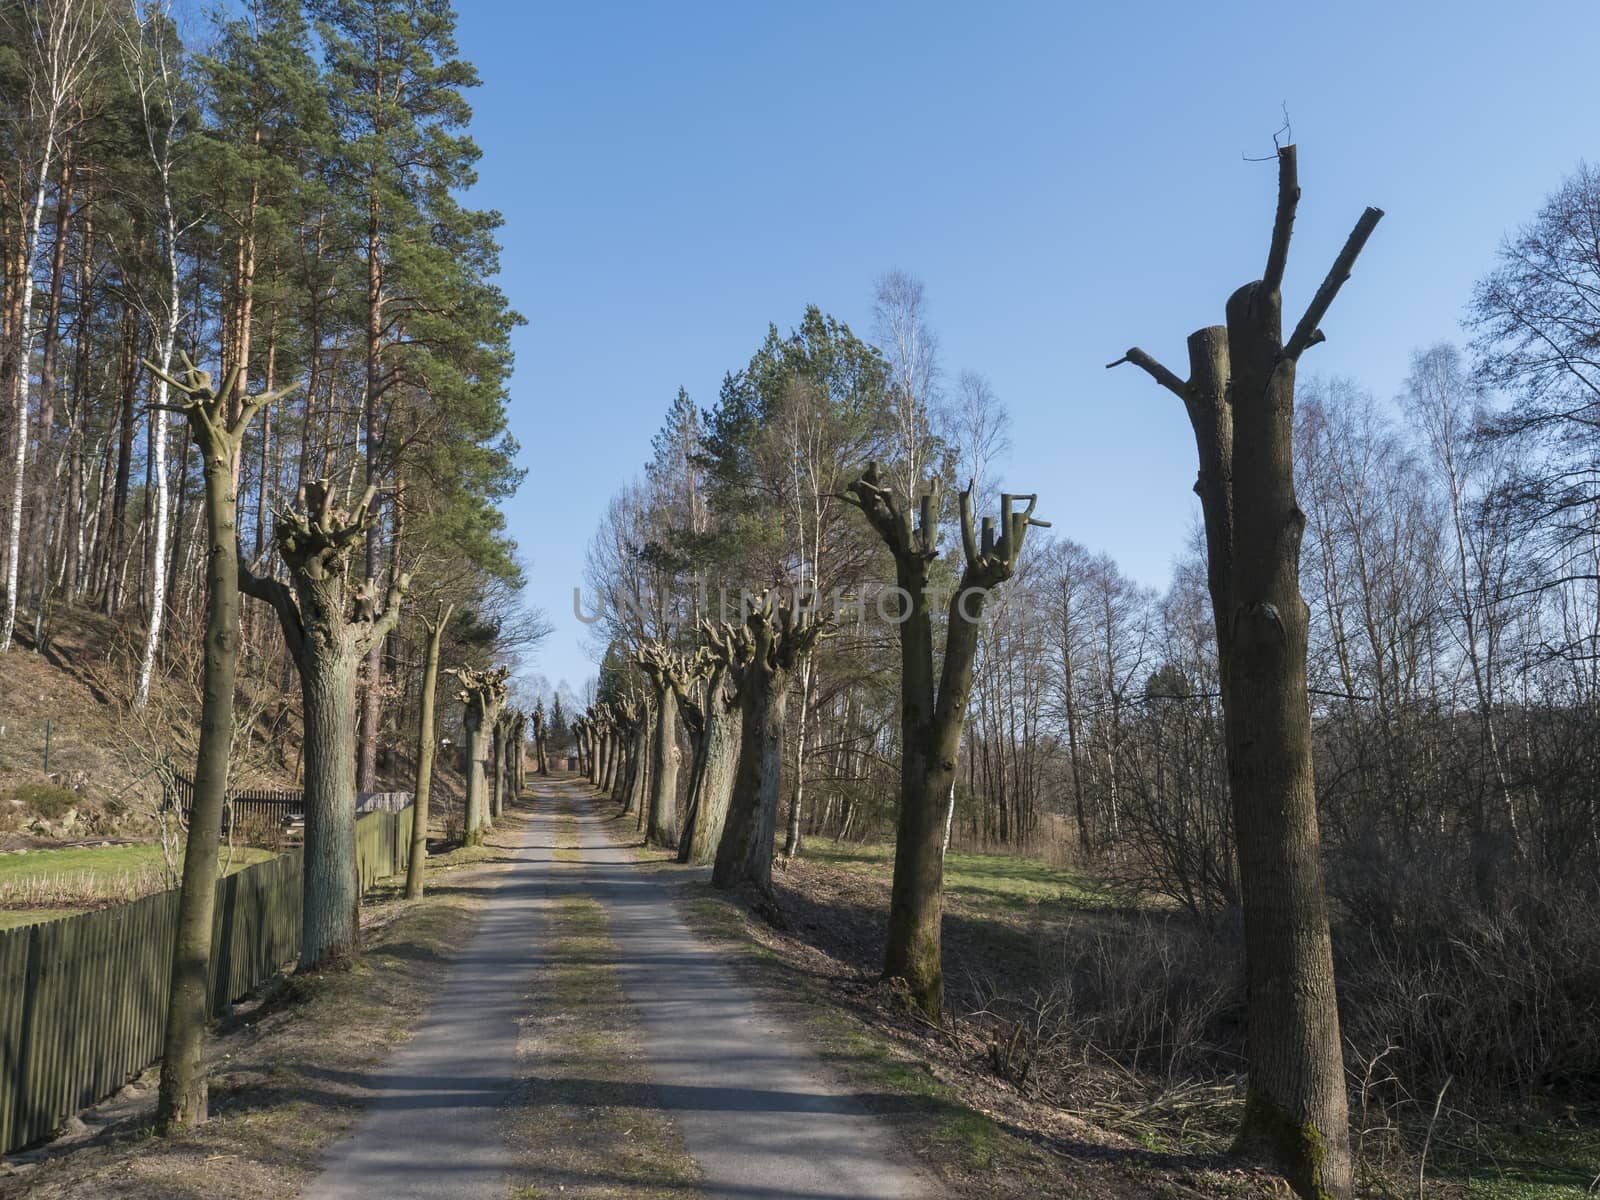 willow tree avenue, parkway to country cemetery at small village Marenicky in luzicke hory, Lusatian Mountains, early spring, blue sky by Henkeova